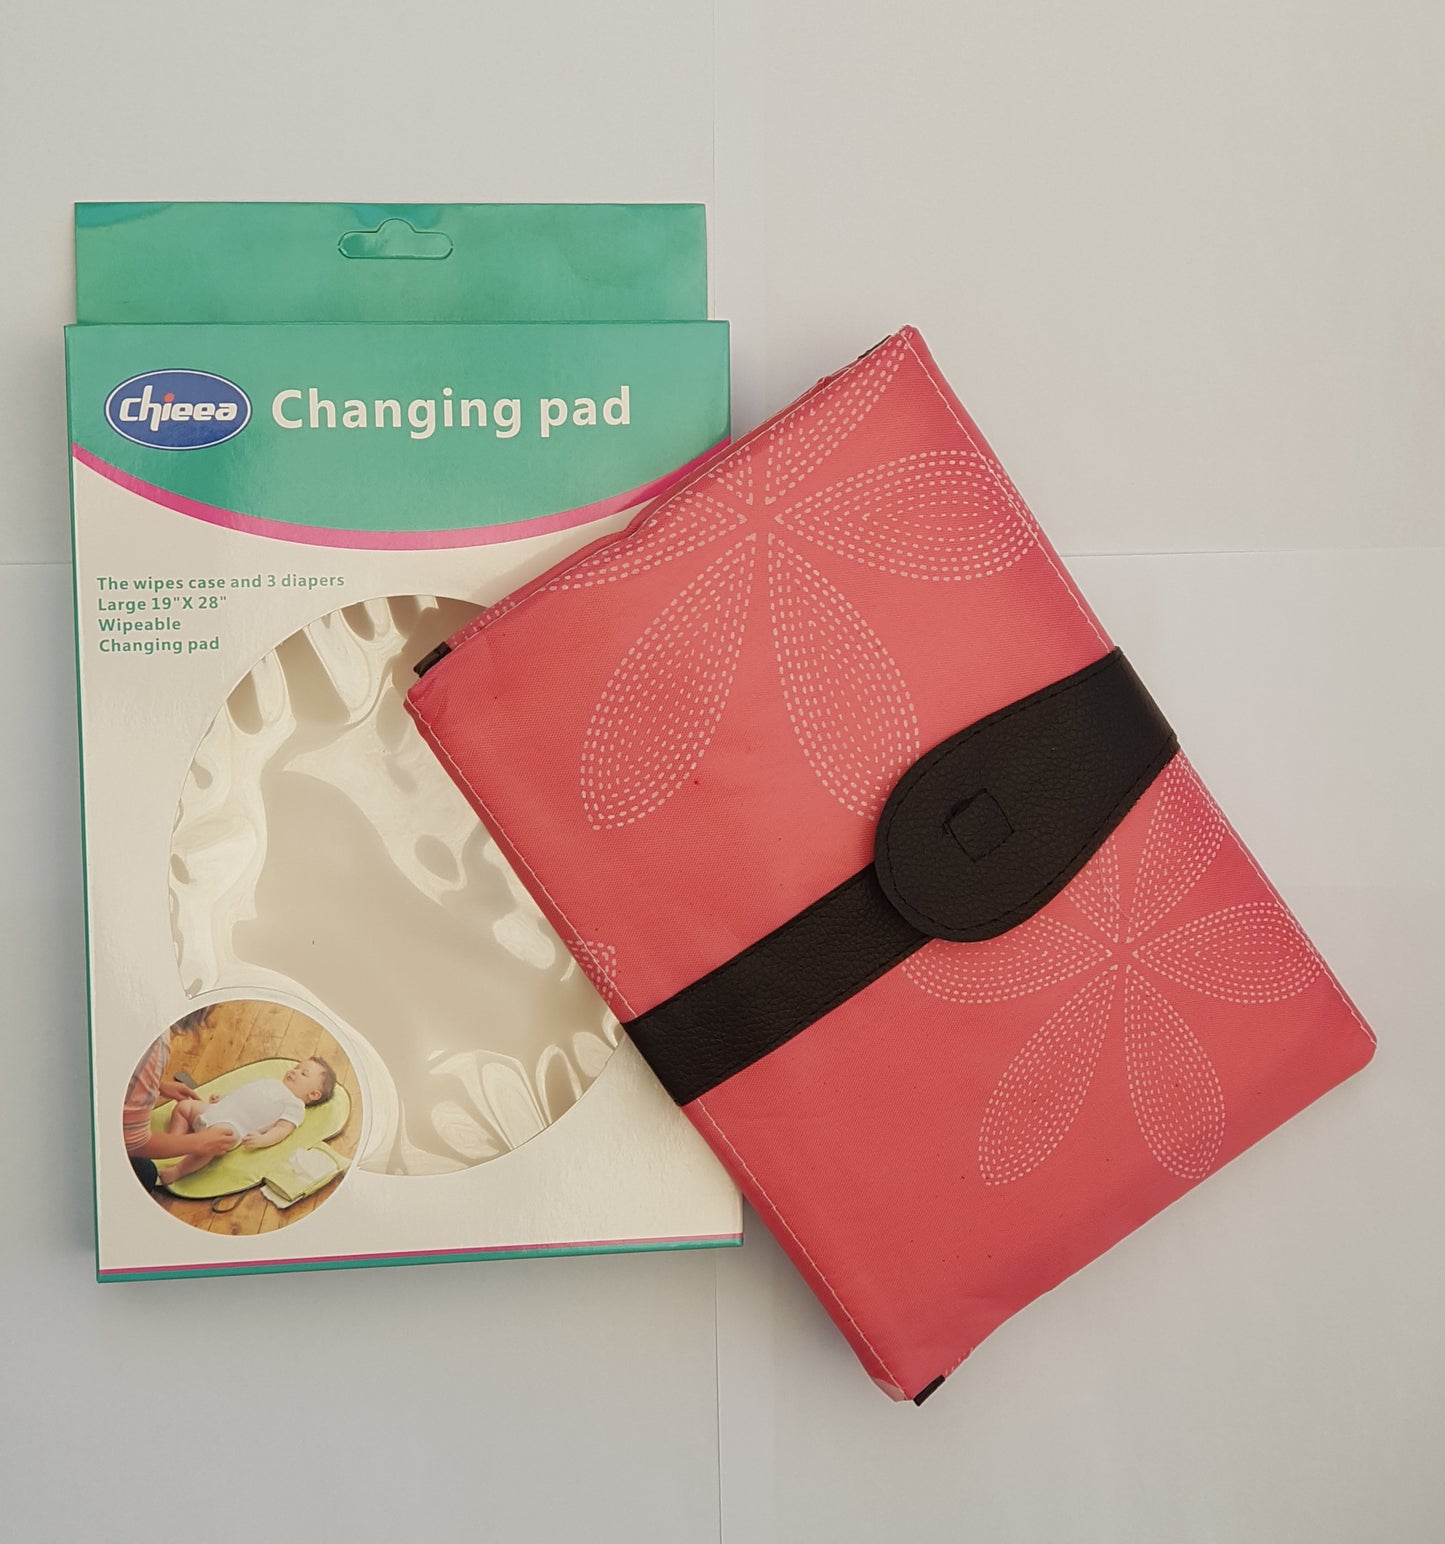 How the Chieea Travel-Friendly Diaper Changing Mat Makes Your Life Easier